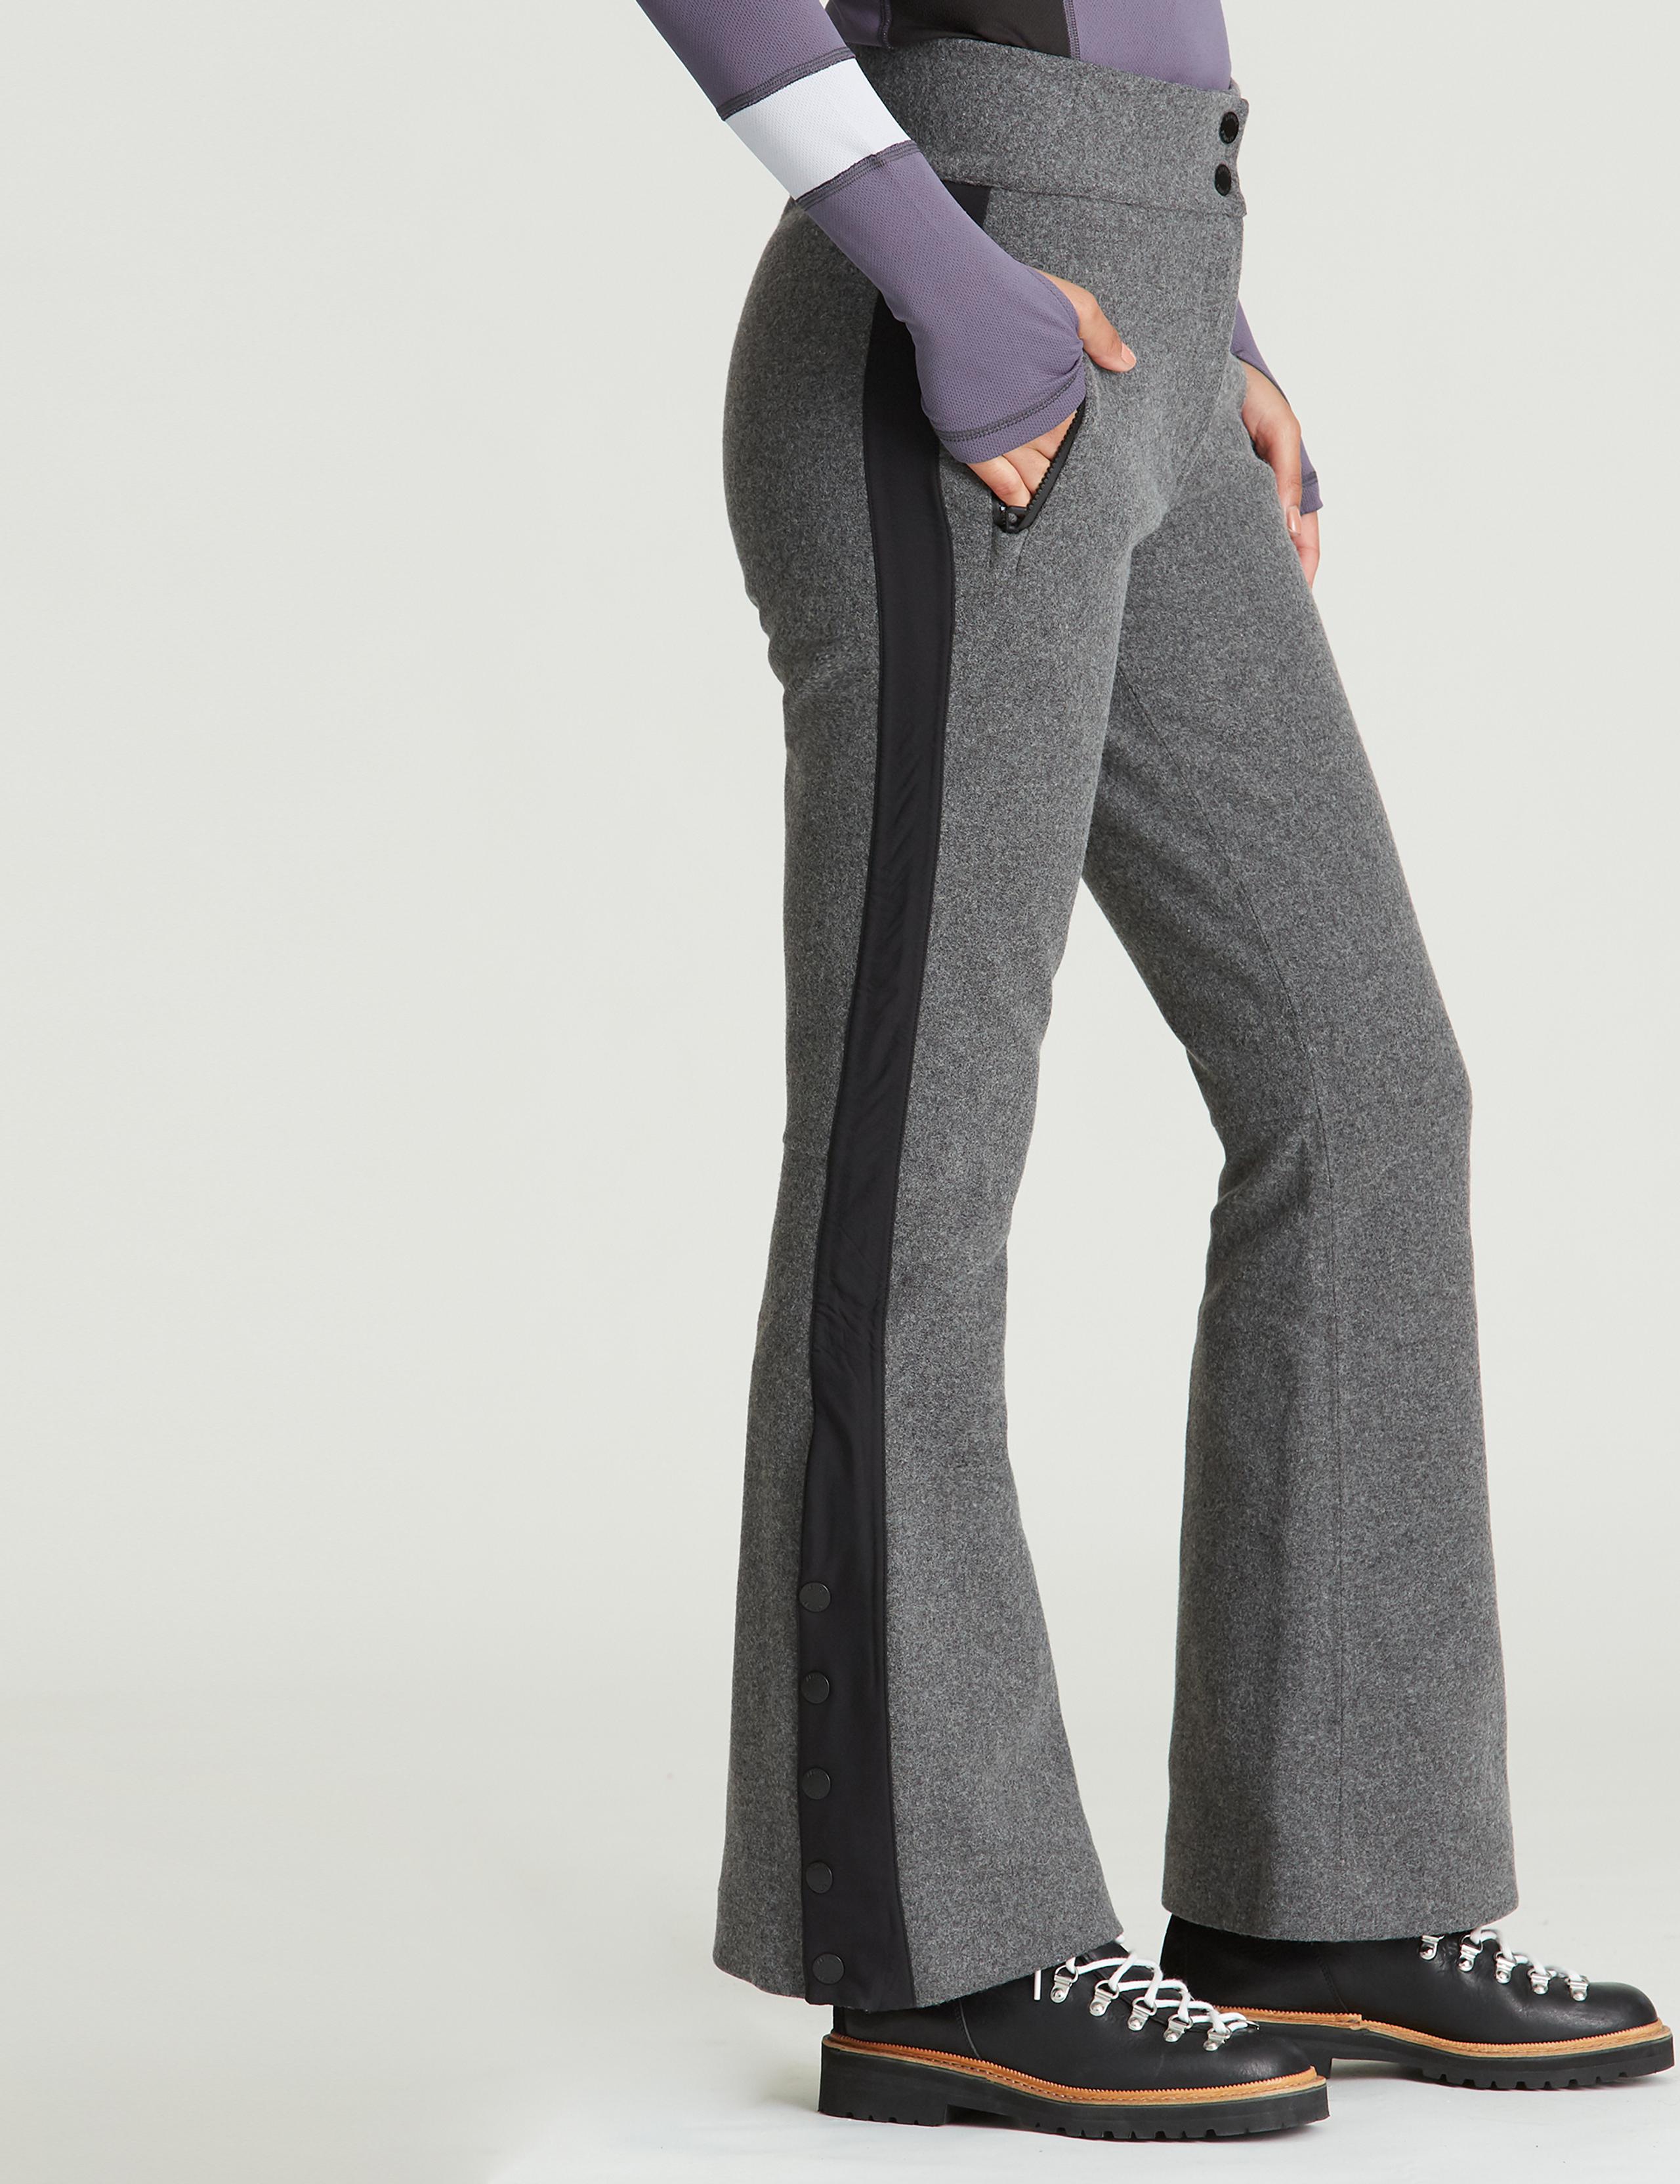 Profile view of woman wearing Victory Wool Snow Pant in studio